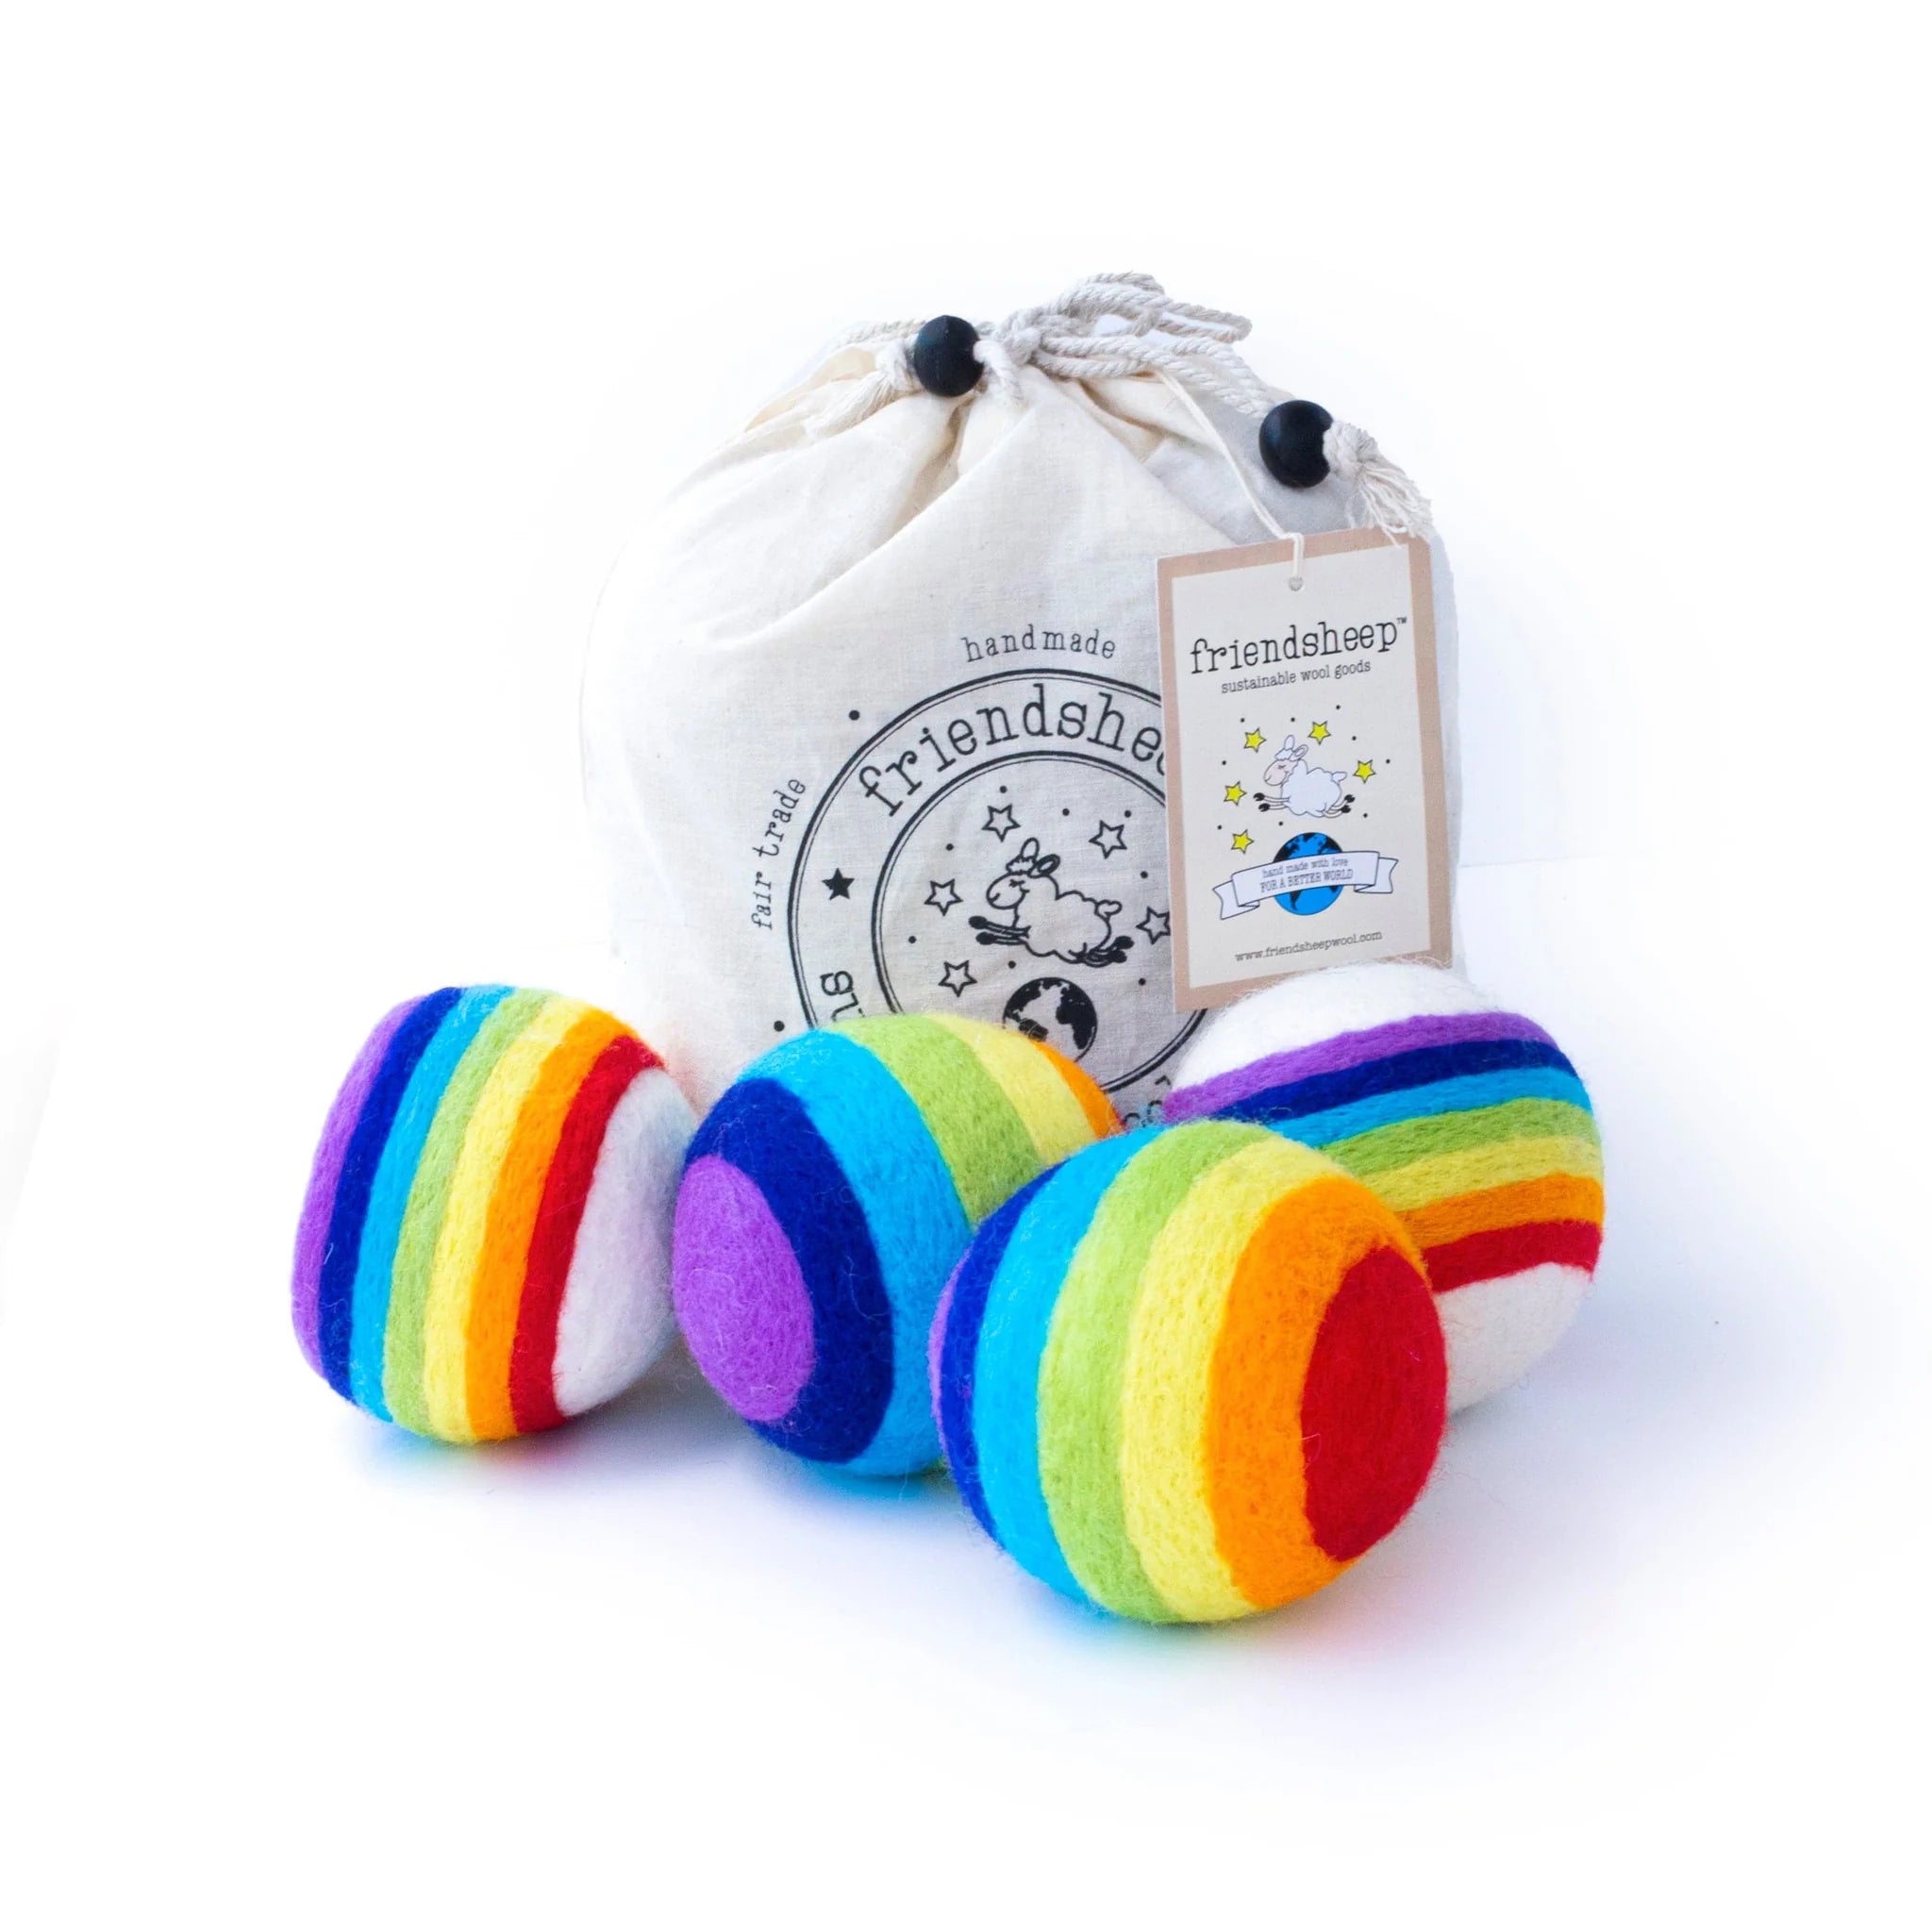 Friendsheep - Disco Rollers Eco Dryer Balls - Pack of 4 - Pride Edition